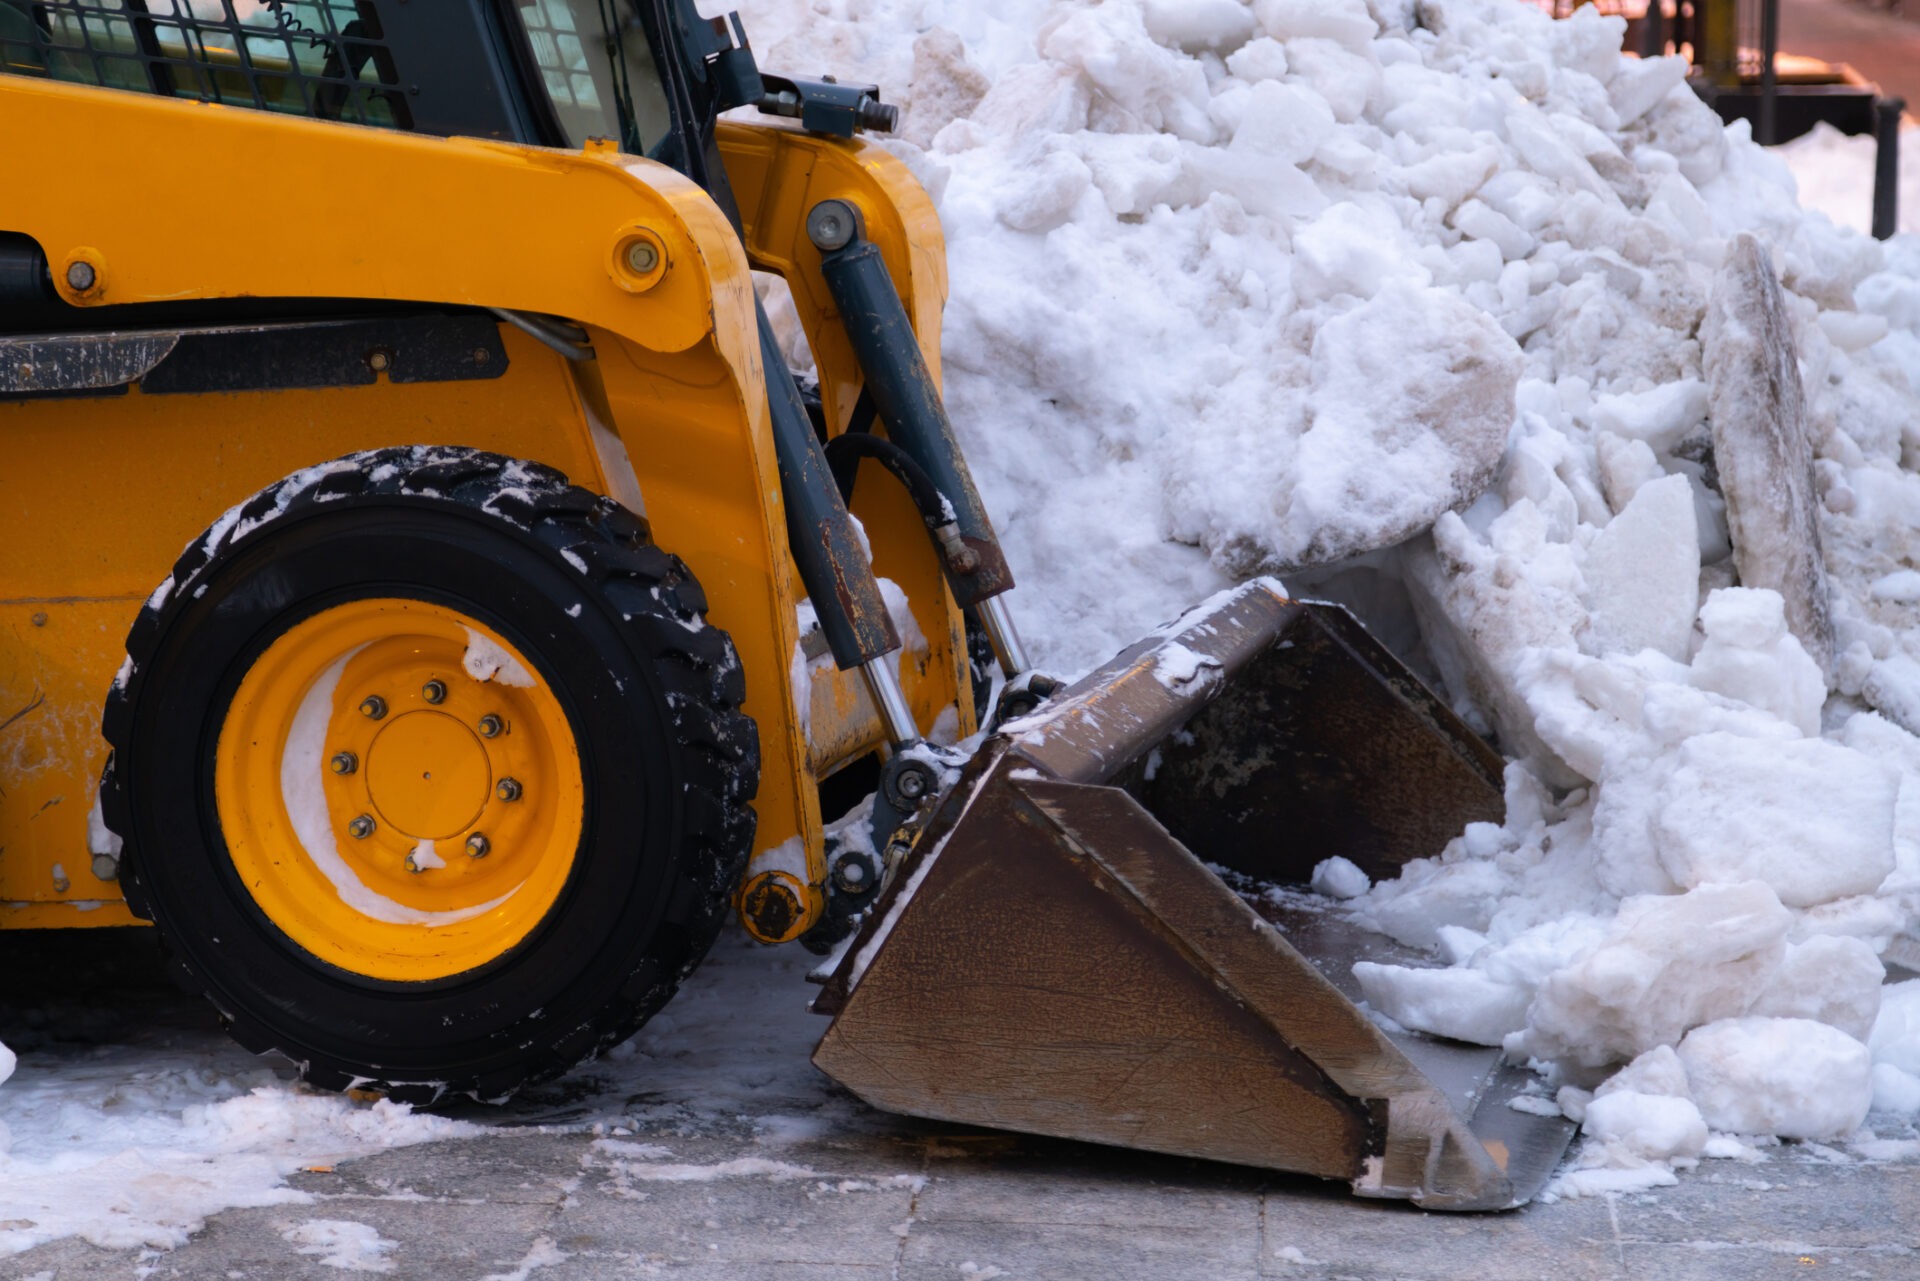 A yellow skid steer loader with a bucket attachment is clearing a large pile of dirty snow from a paved surface in a cold environment.